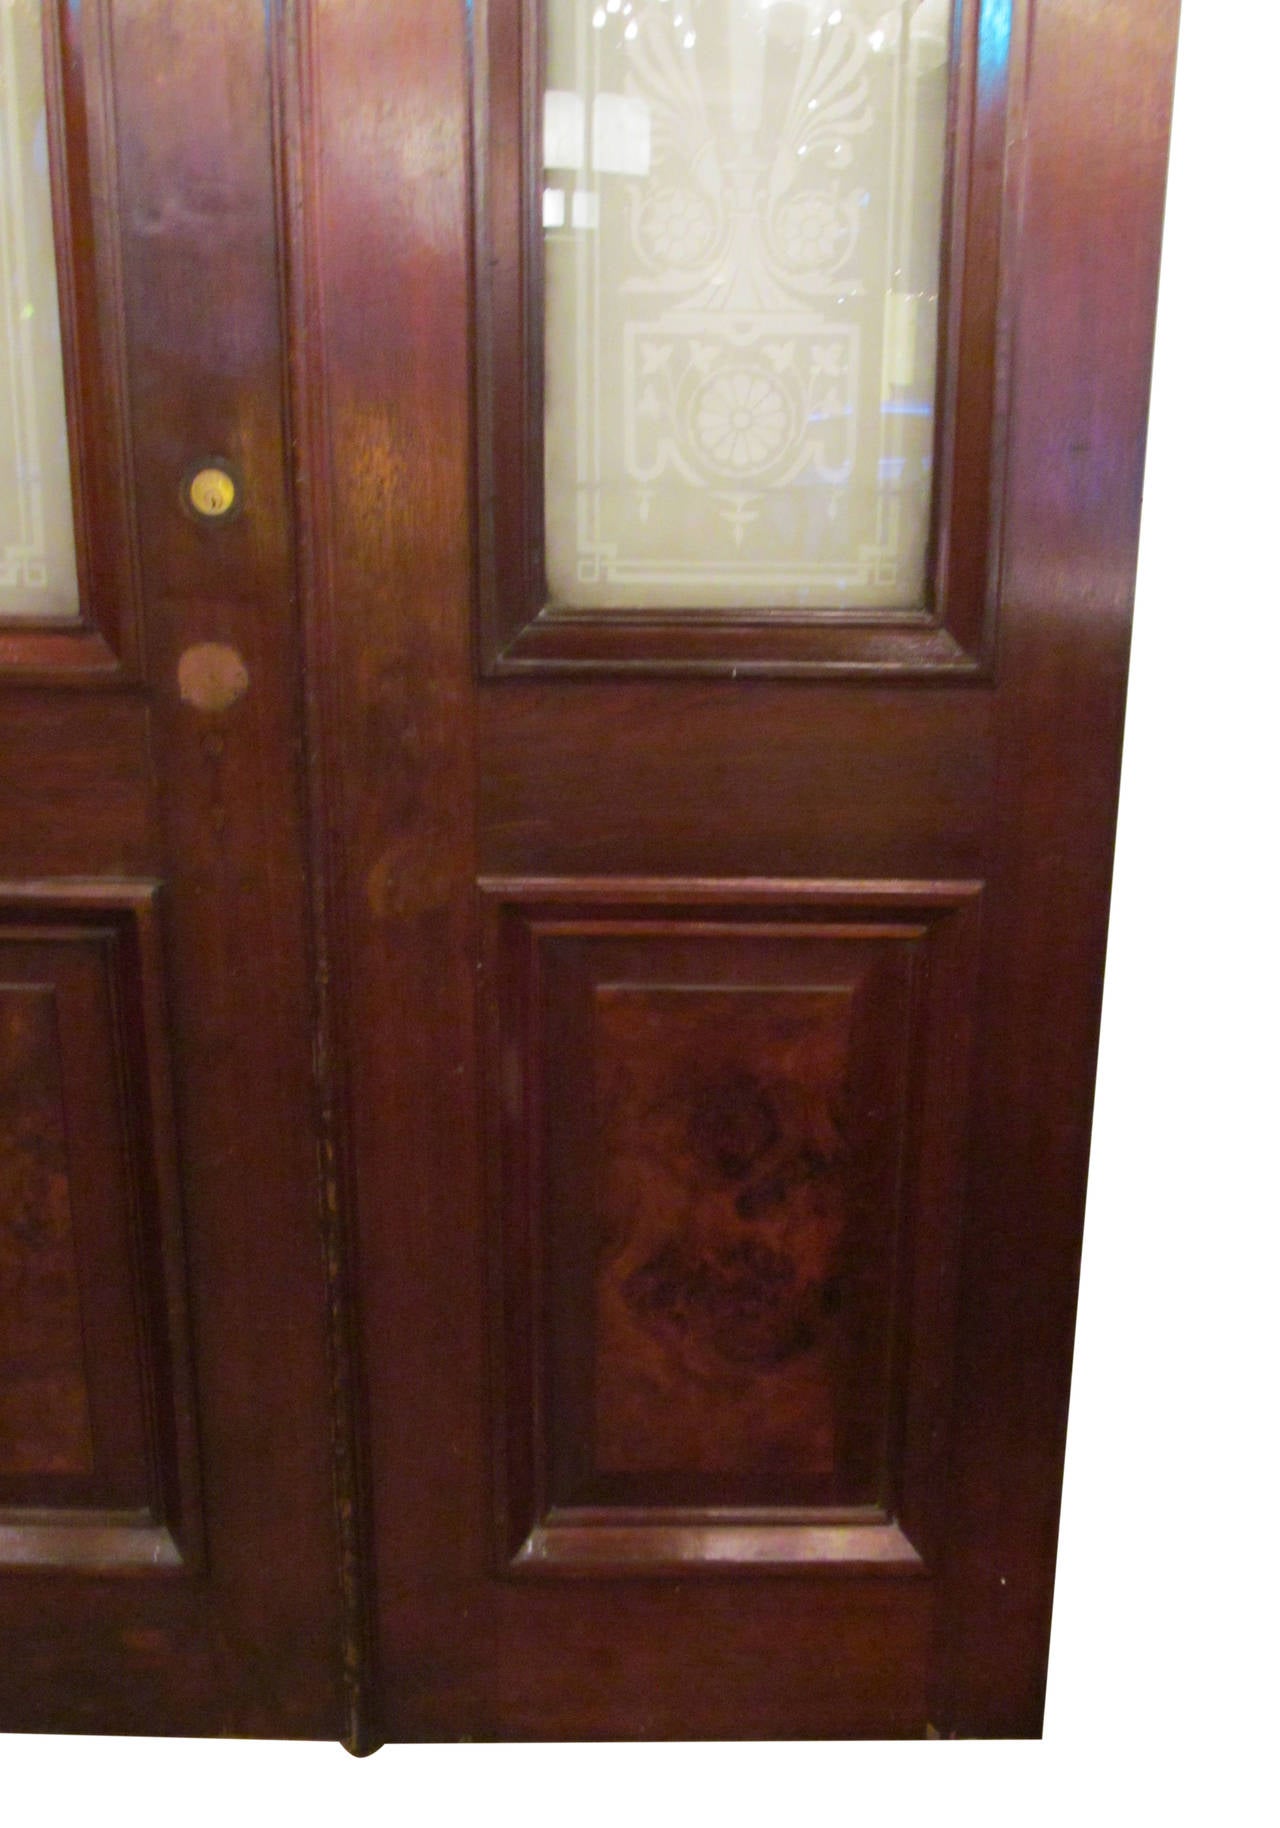 1930s double doors with ornate etched glass urn design panels. Each panel displays the number 52 in gold leaf which can be removed. This can be seen at our 2420 Broadway location on the upper west side in Manhattan.